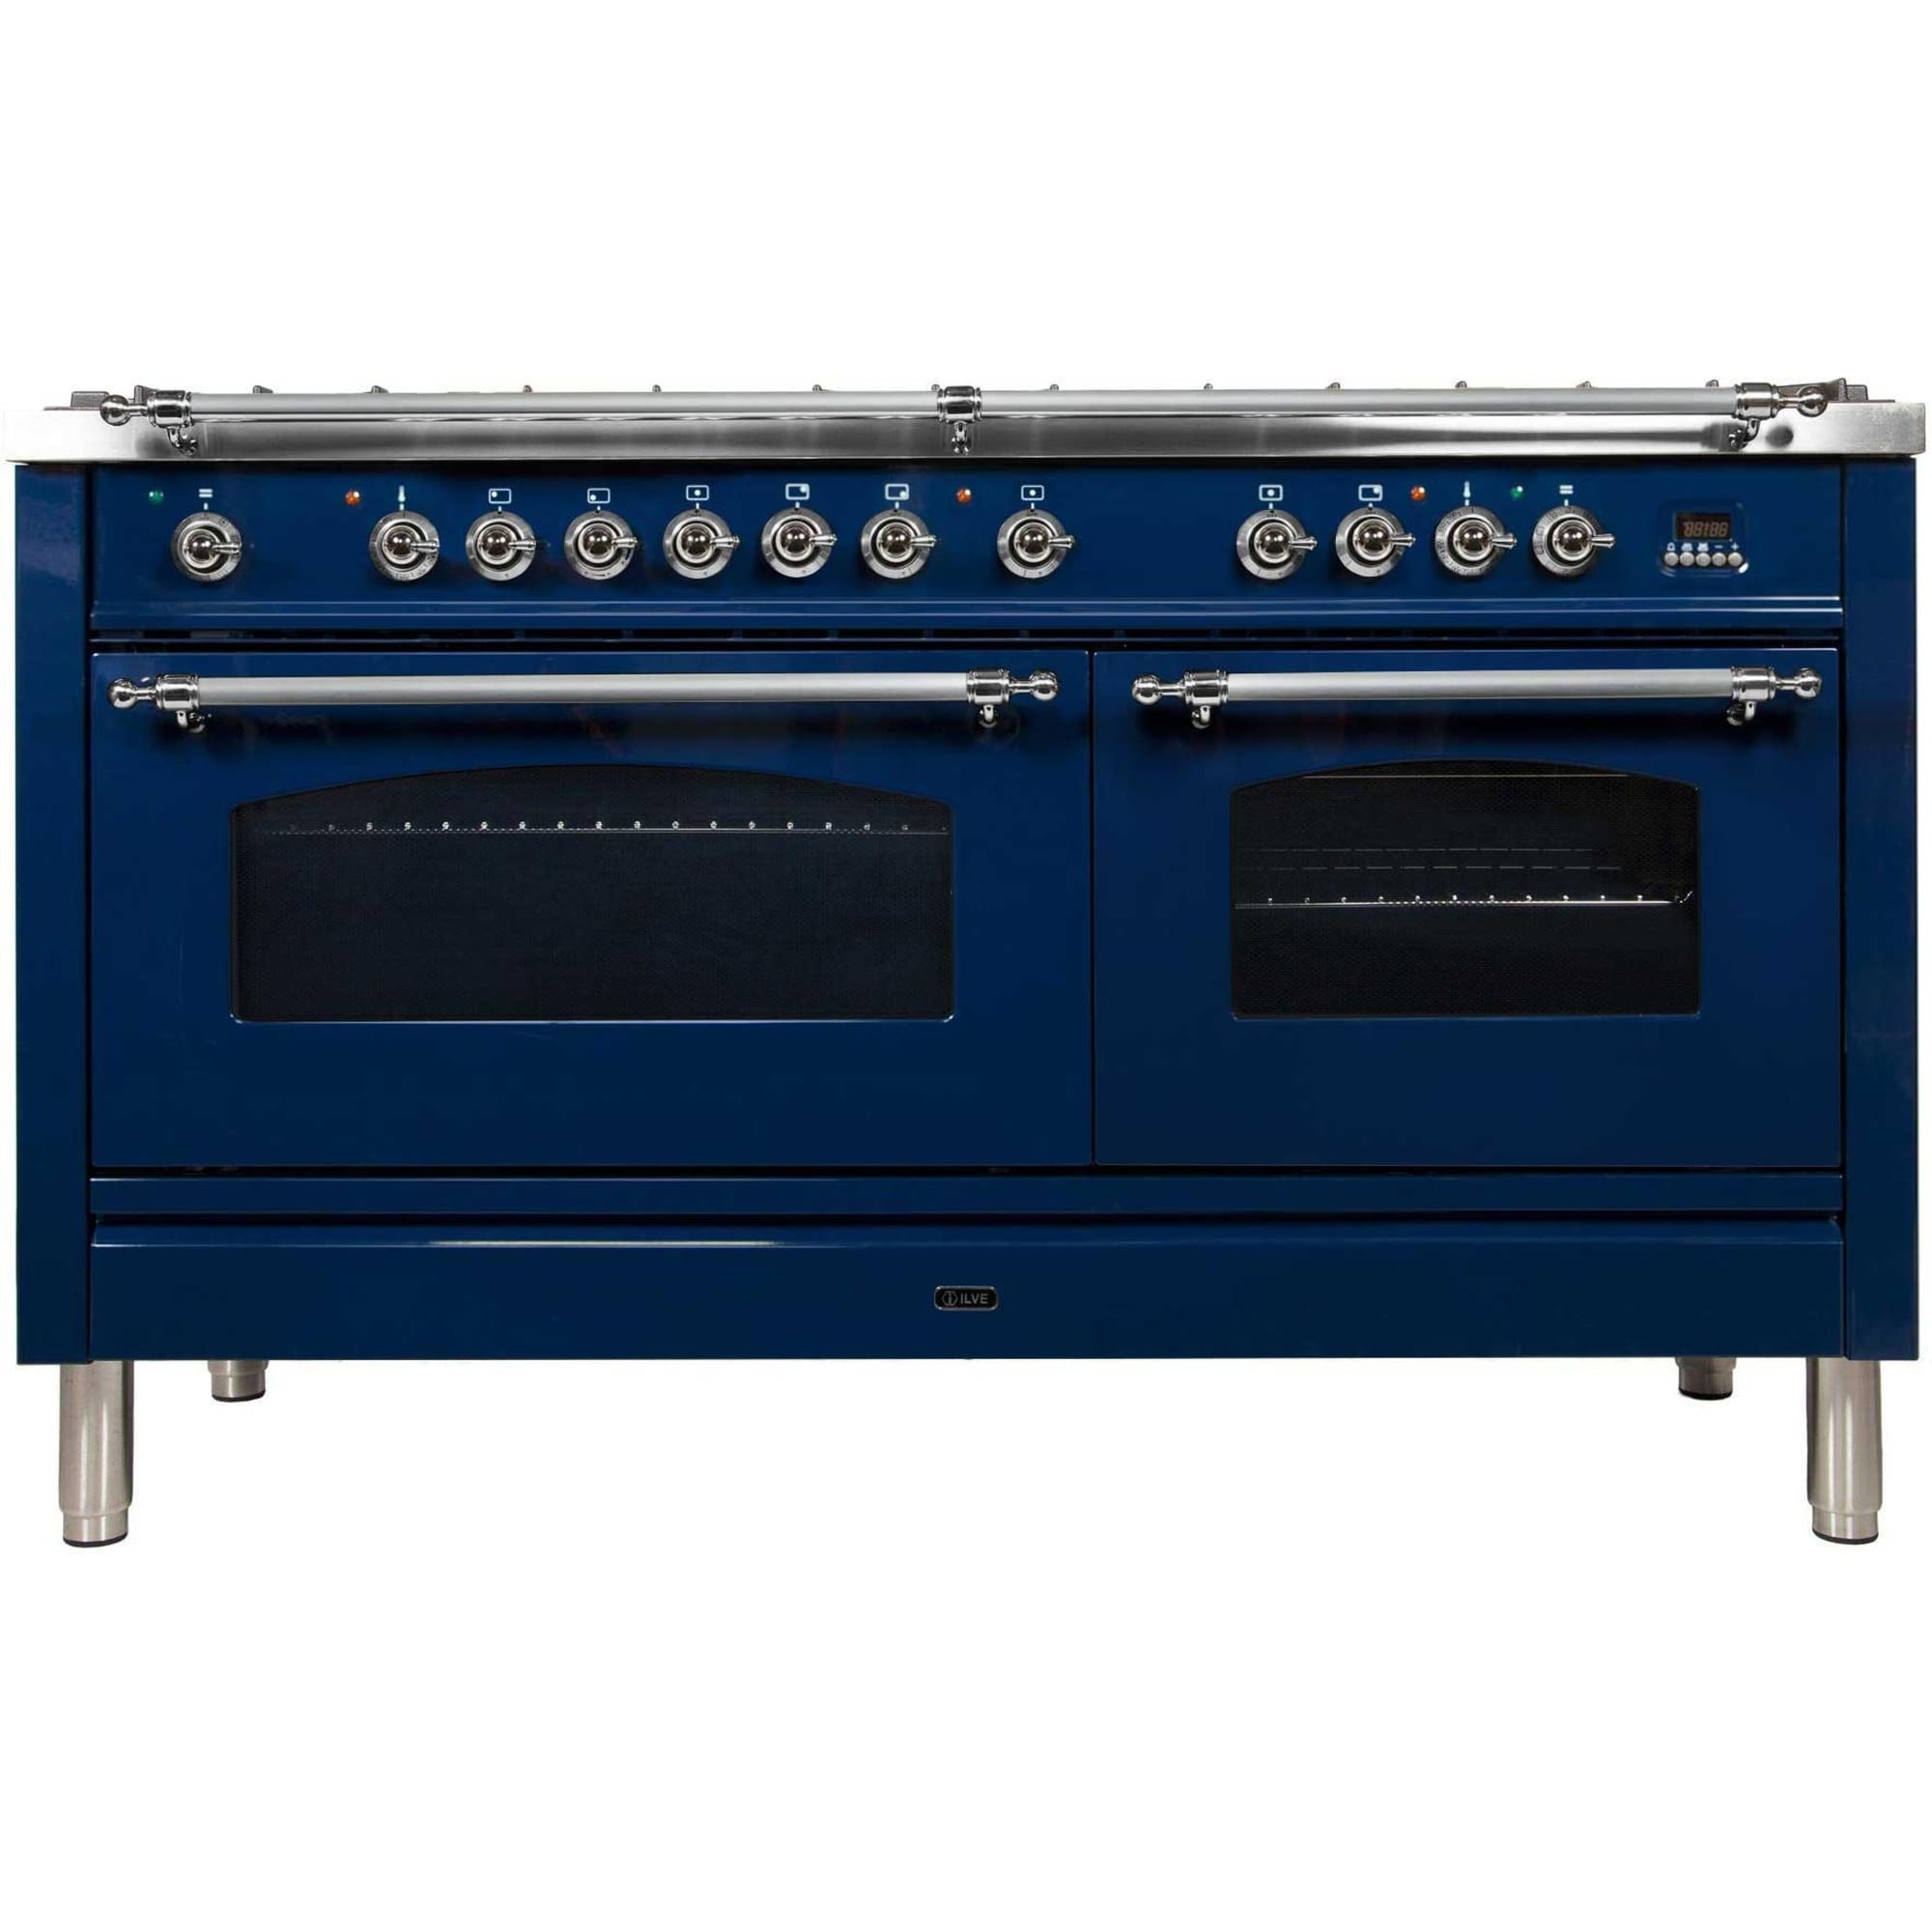 60" Nostalgie Series Double Oven Dual-Fuel Range with Griddle